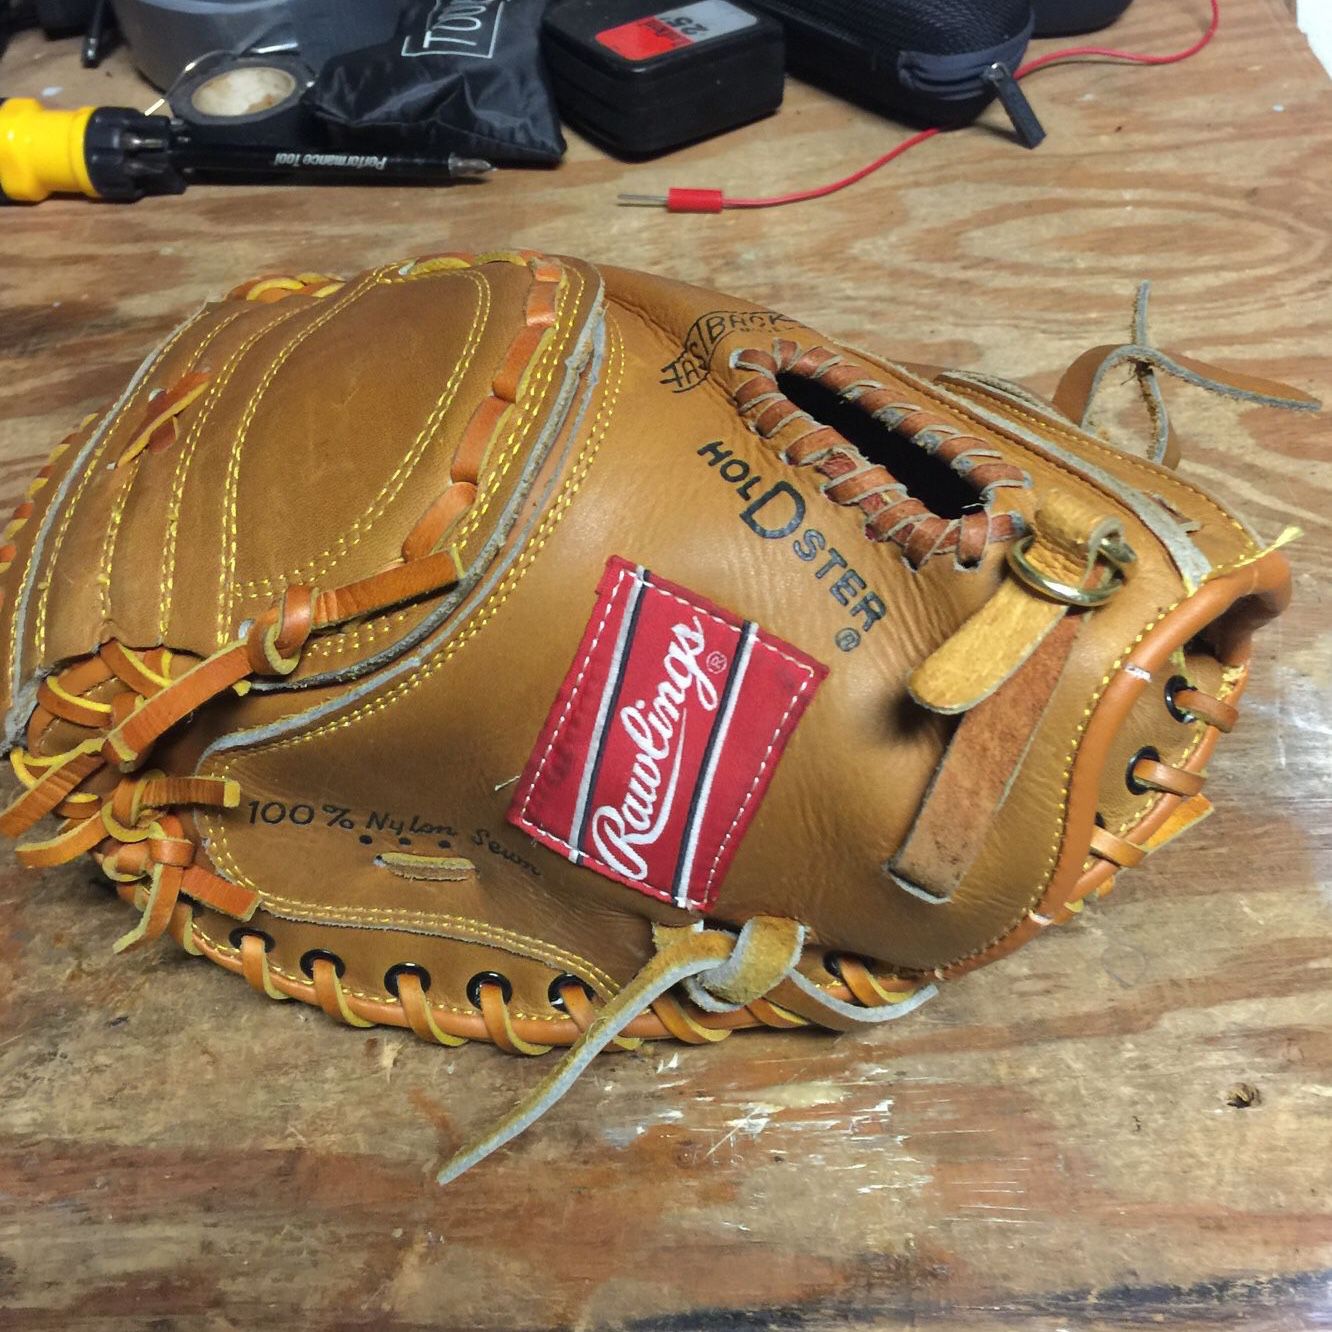 Brand new Rawlings left handed catchers glove with Mlb baseball!